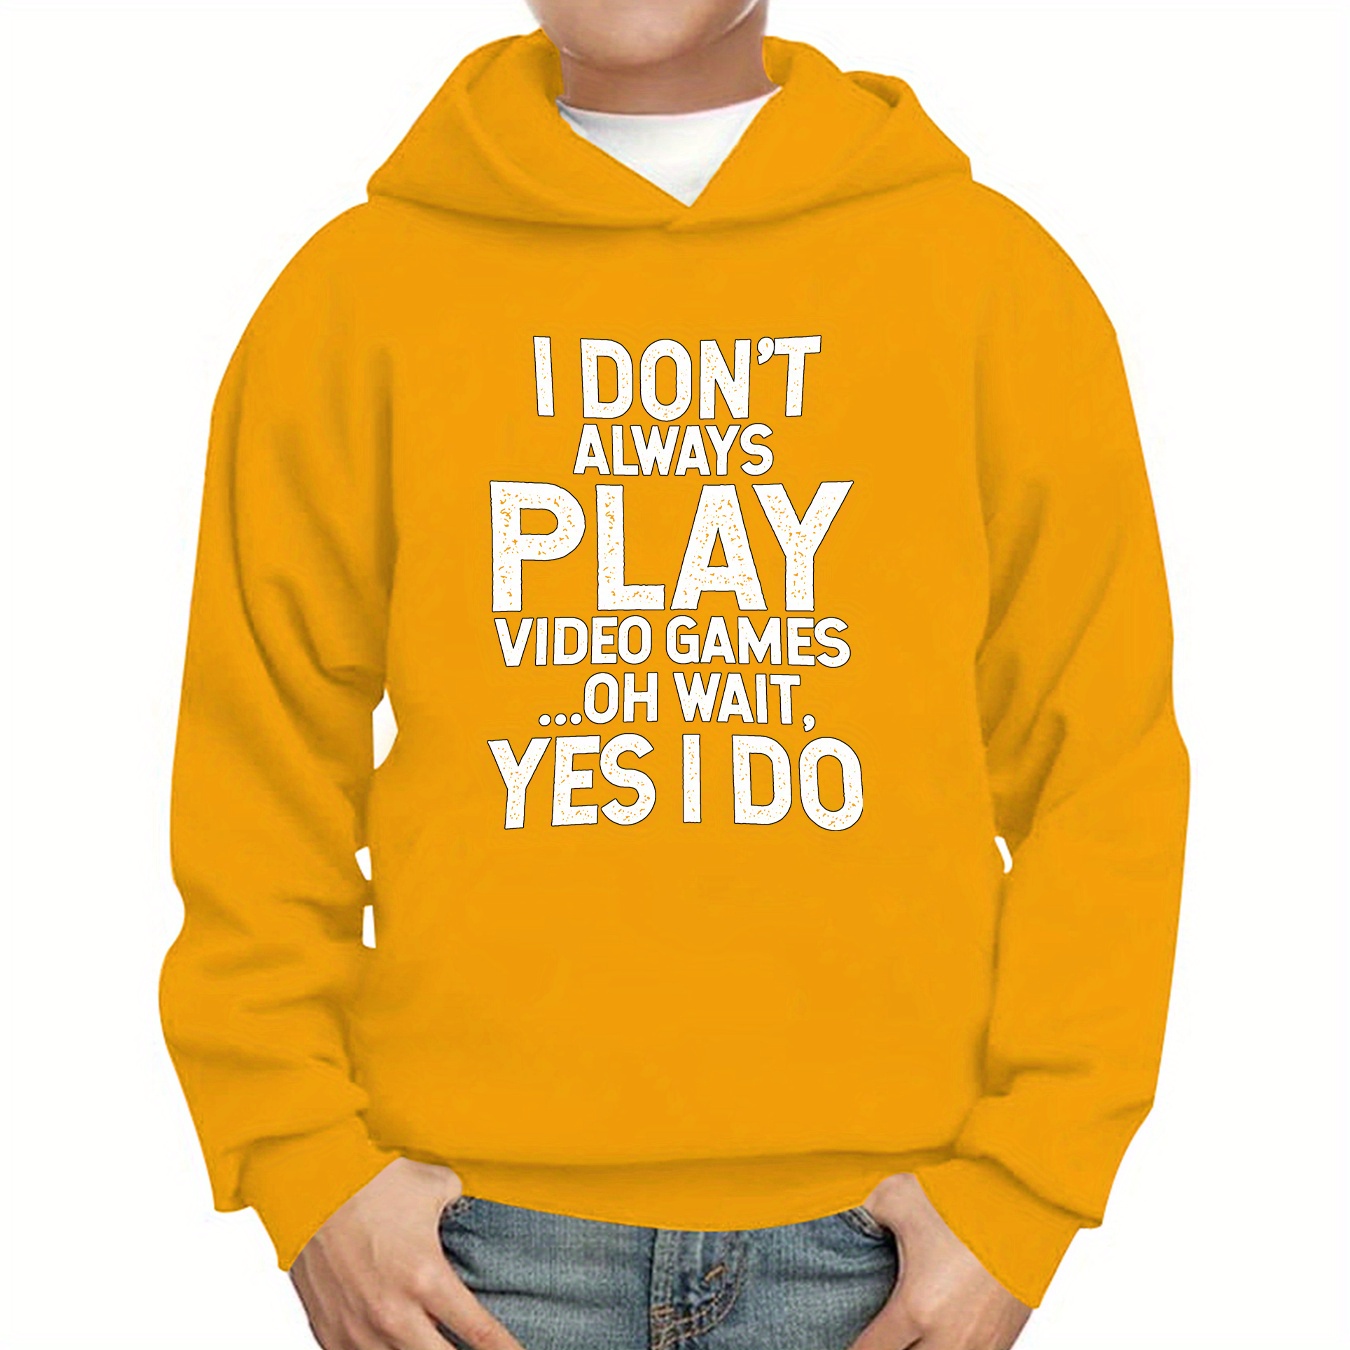 

I Don't Always Play Vedio Games Letter Print Hoodies For Boys - Casual Graphic Design With Stretch Fabric For Comfortable Autumn/winter Wear